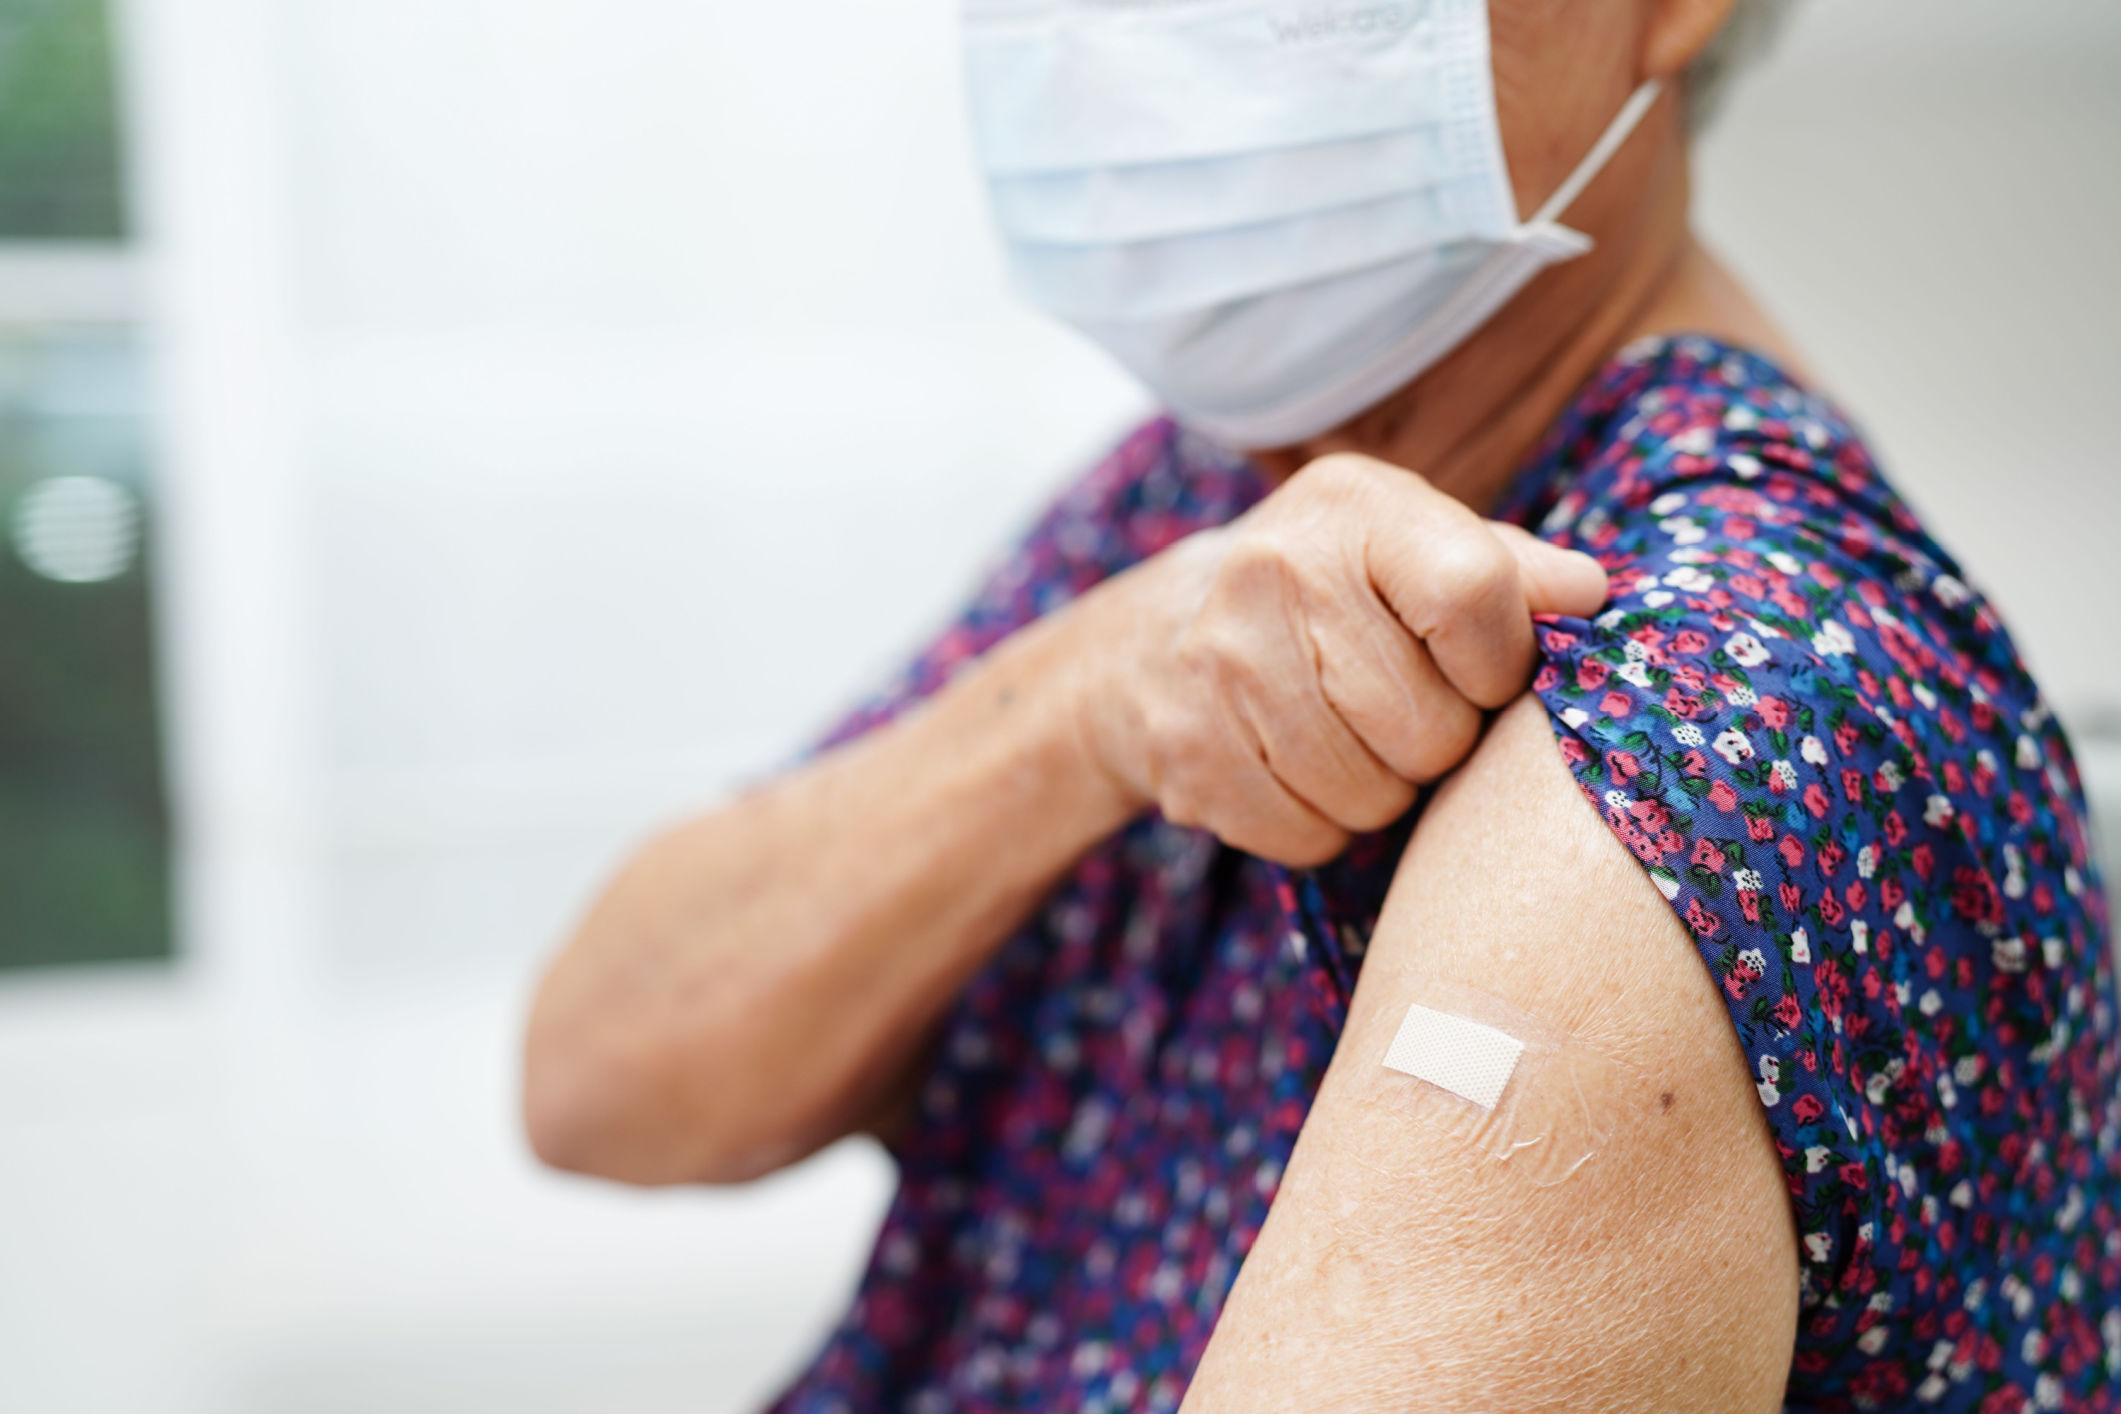 Aged care residents urged to vaccinate ahead of winter COVID-19 wave